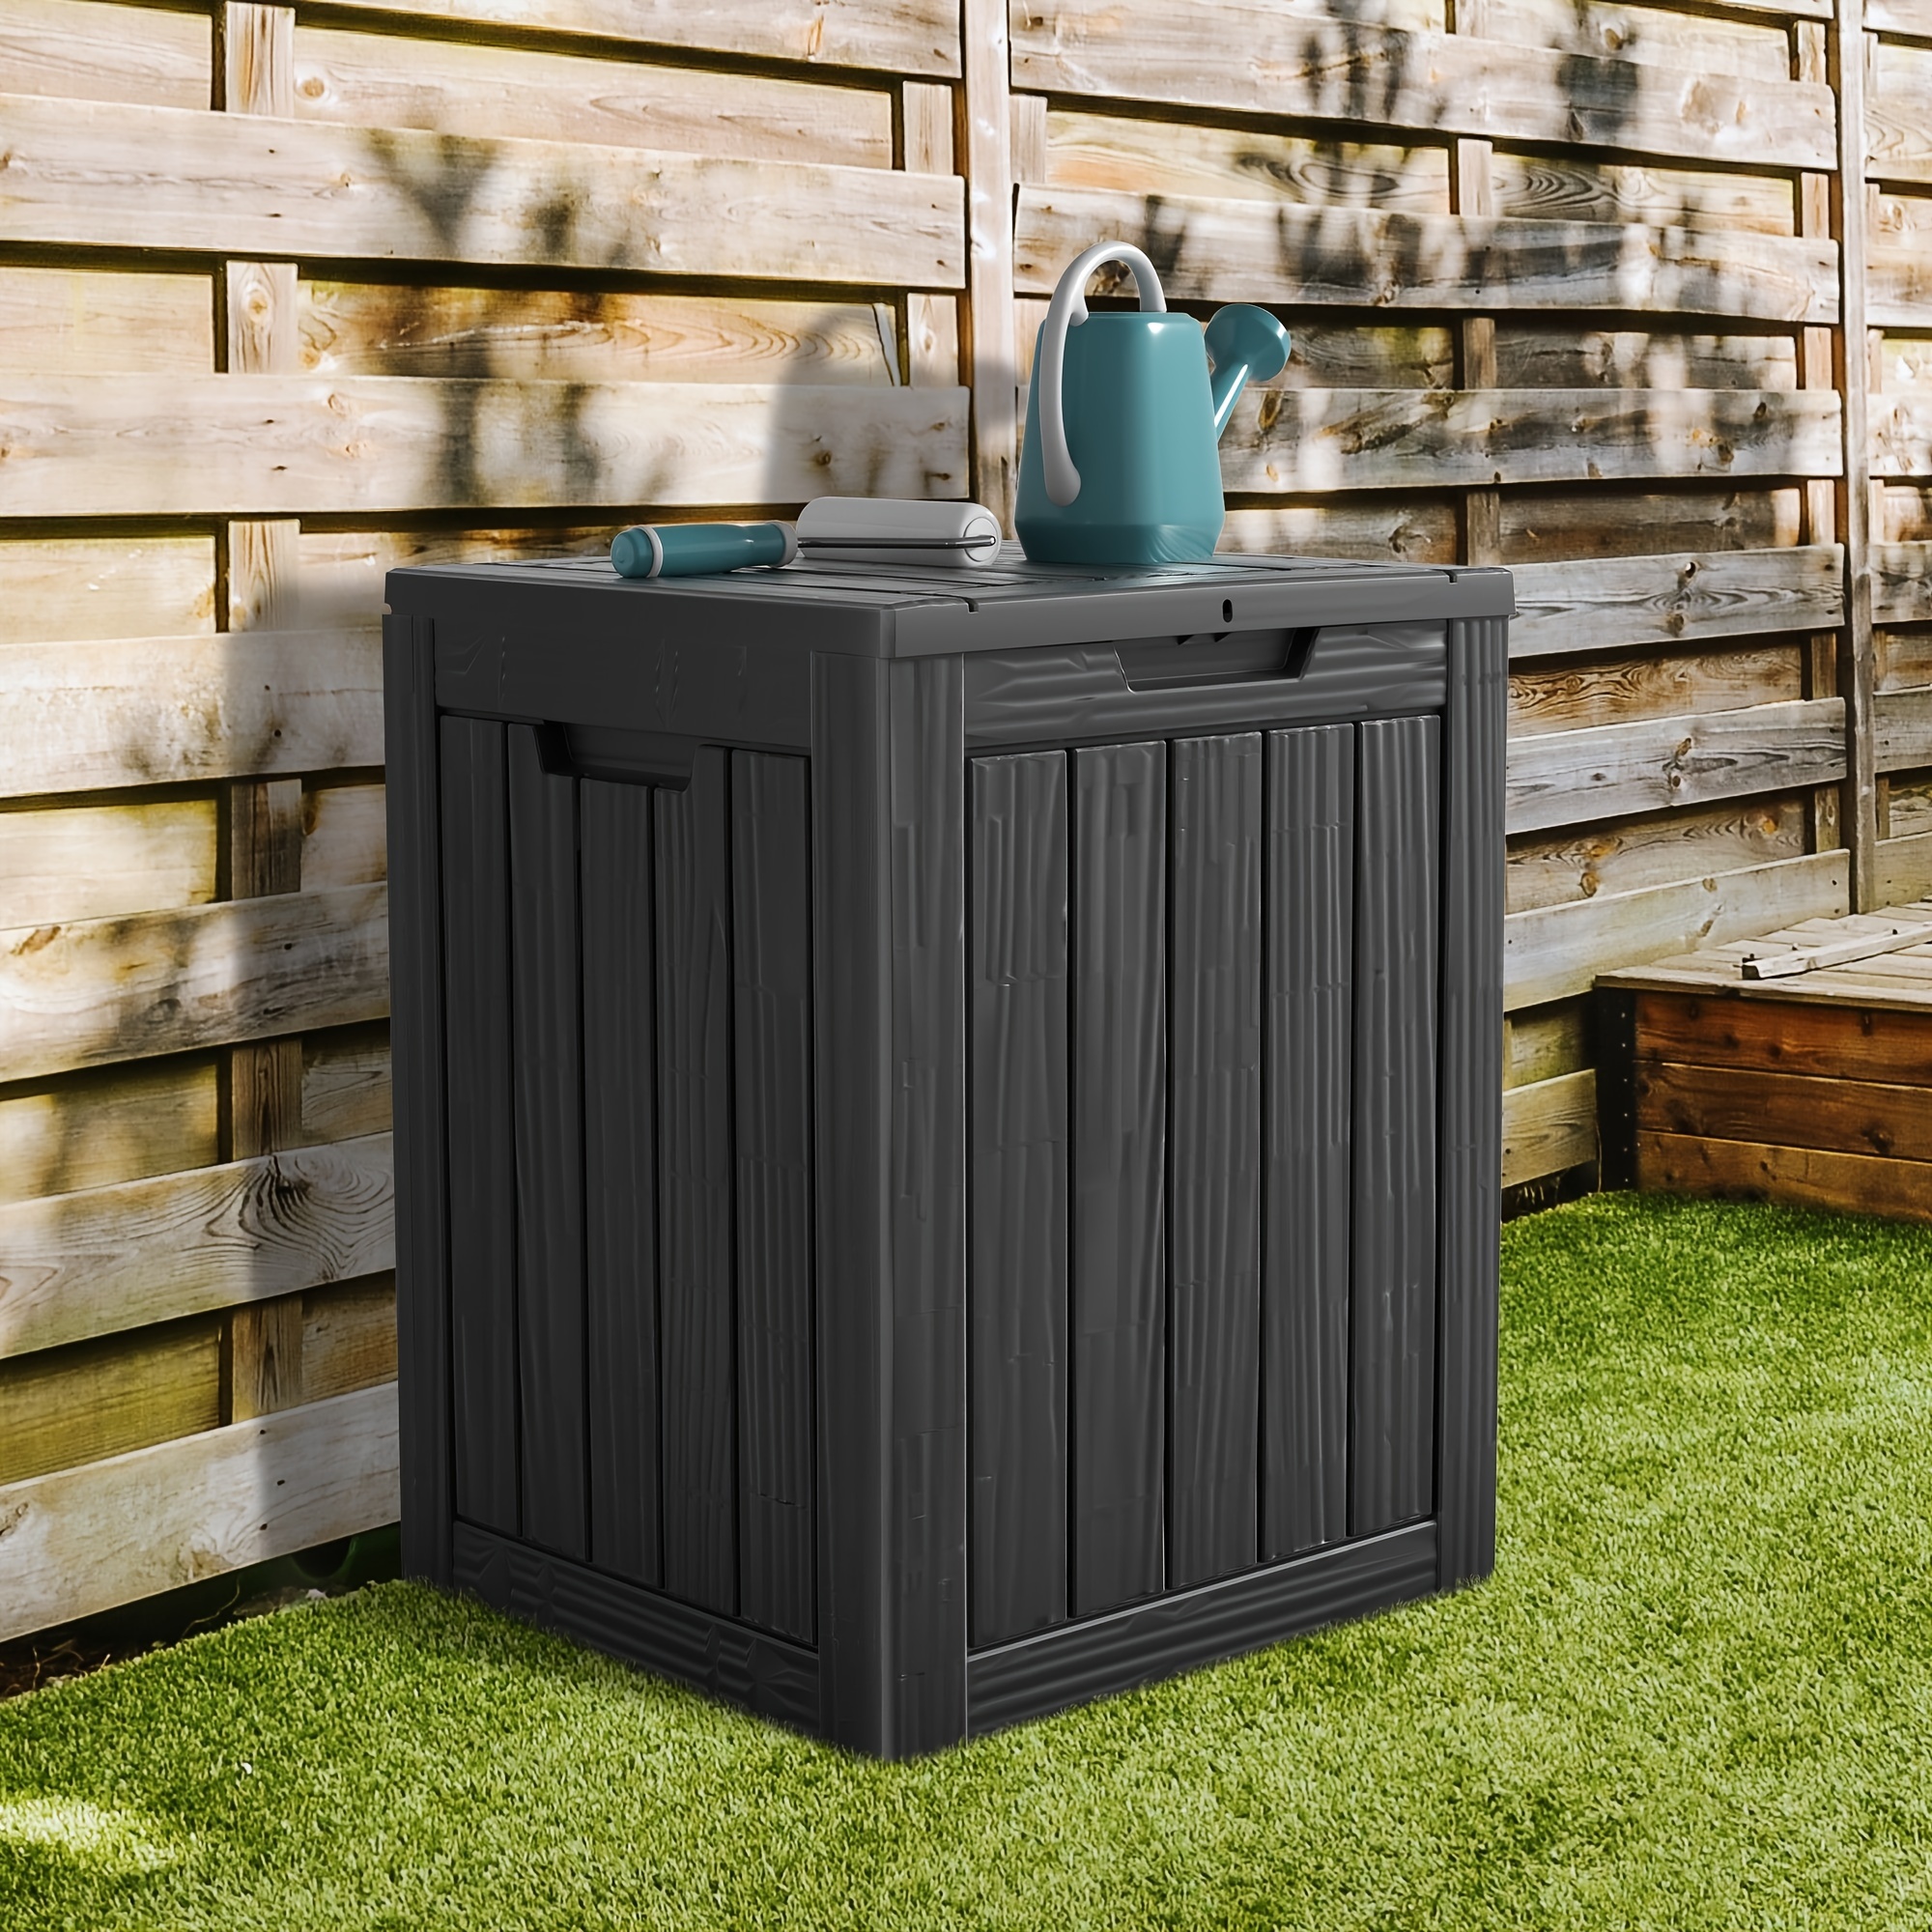 

28 Gallon Resin Deck Box, Lockable Waterproof Ourdoor Storage Container For Pool Accessories, Patio Furniture, Cushions, Toys And Garden Tools.- Grey